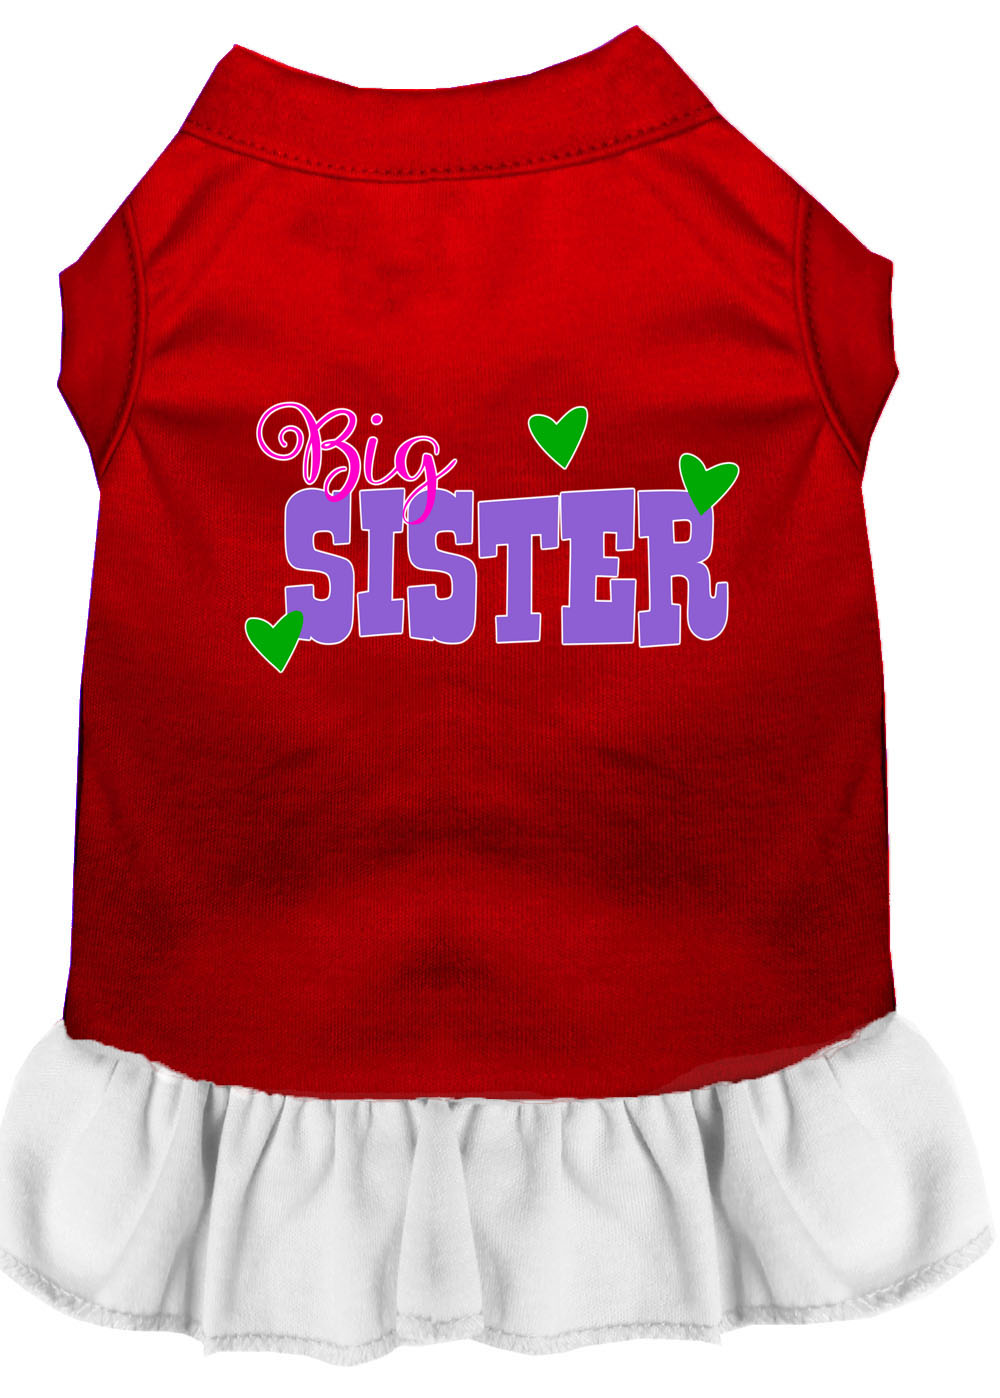 Big Sister Screen Print Dog Dress Red with White XL